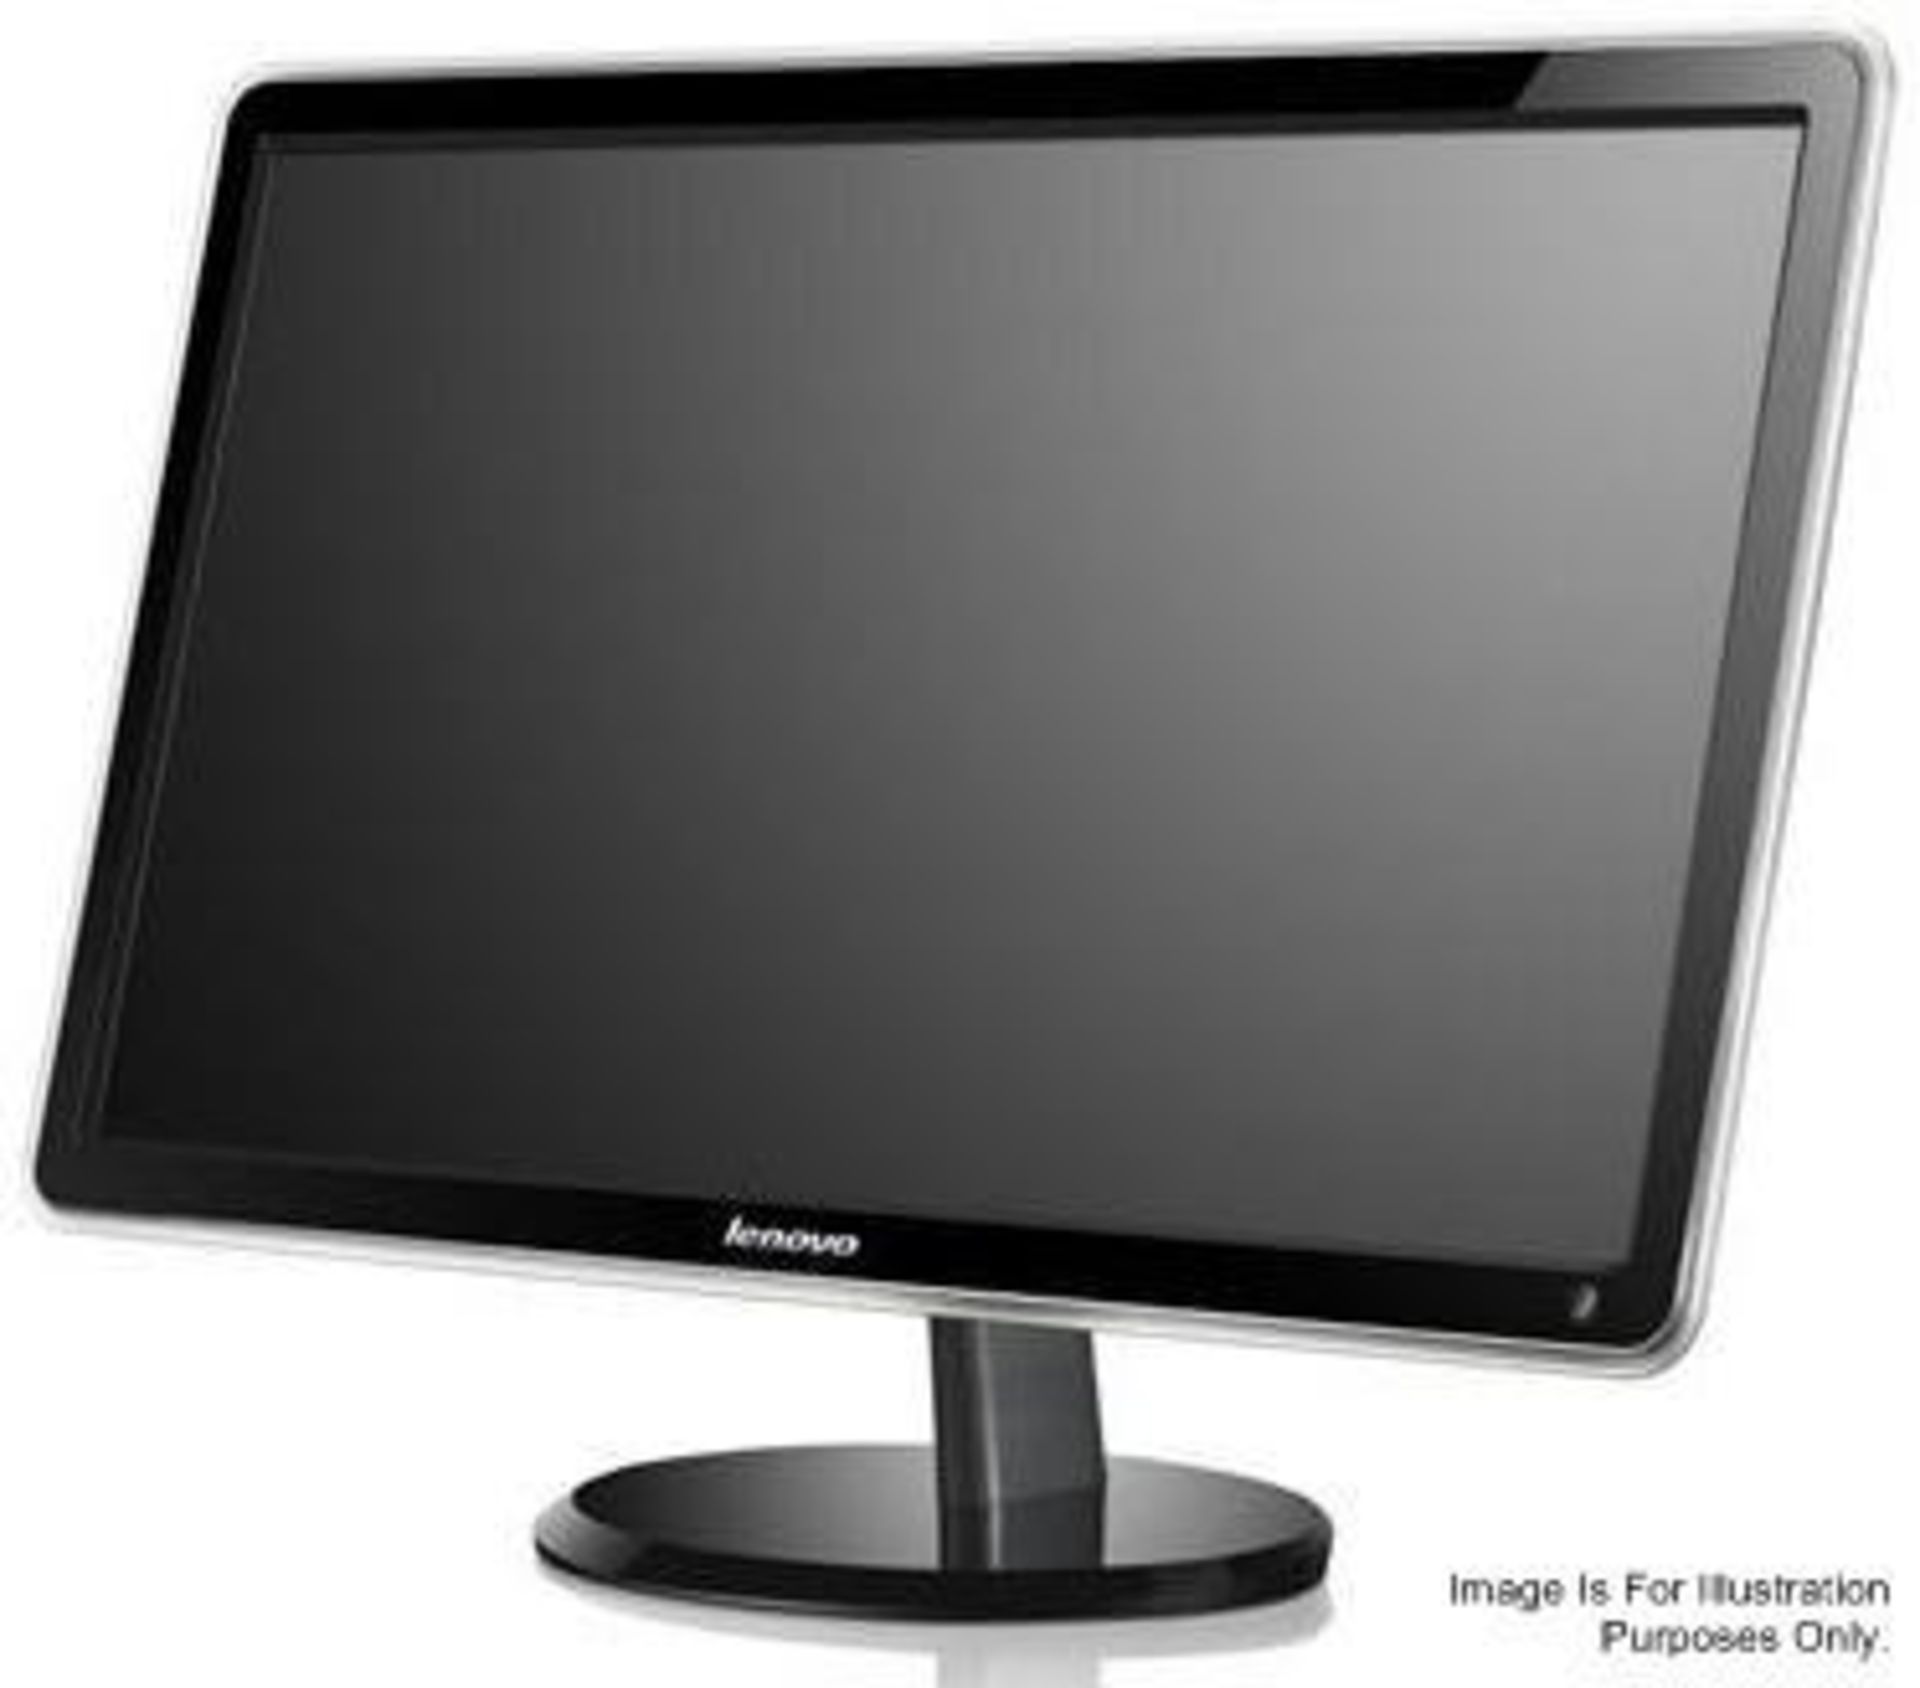 1 x Lenovo LS2421p Wide 23.6" Full HD LED TFT Monitor (Model: 4015-LS1) - Recently Taken From A Work